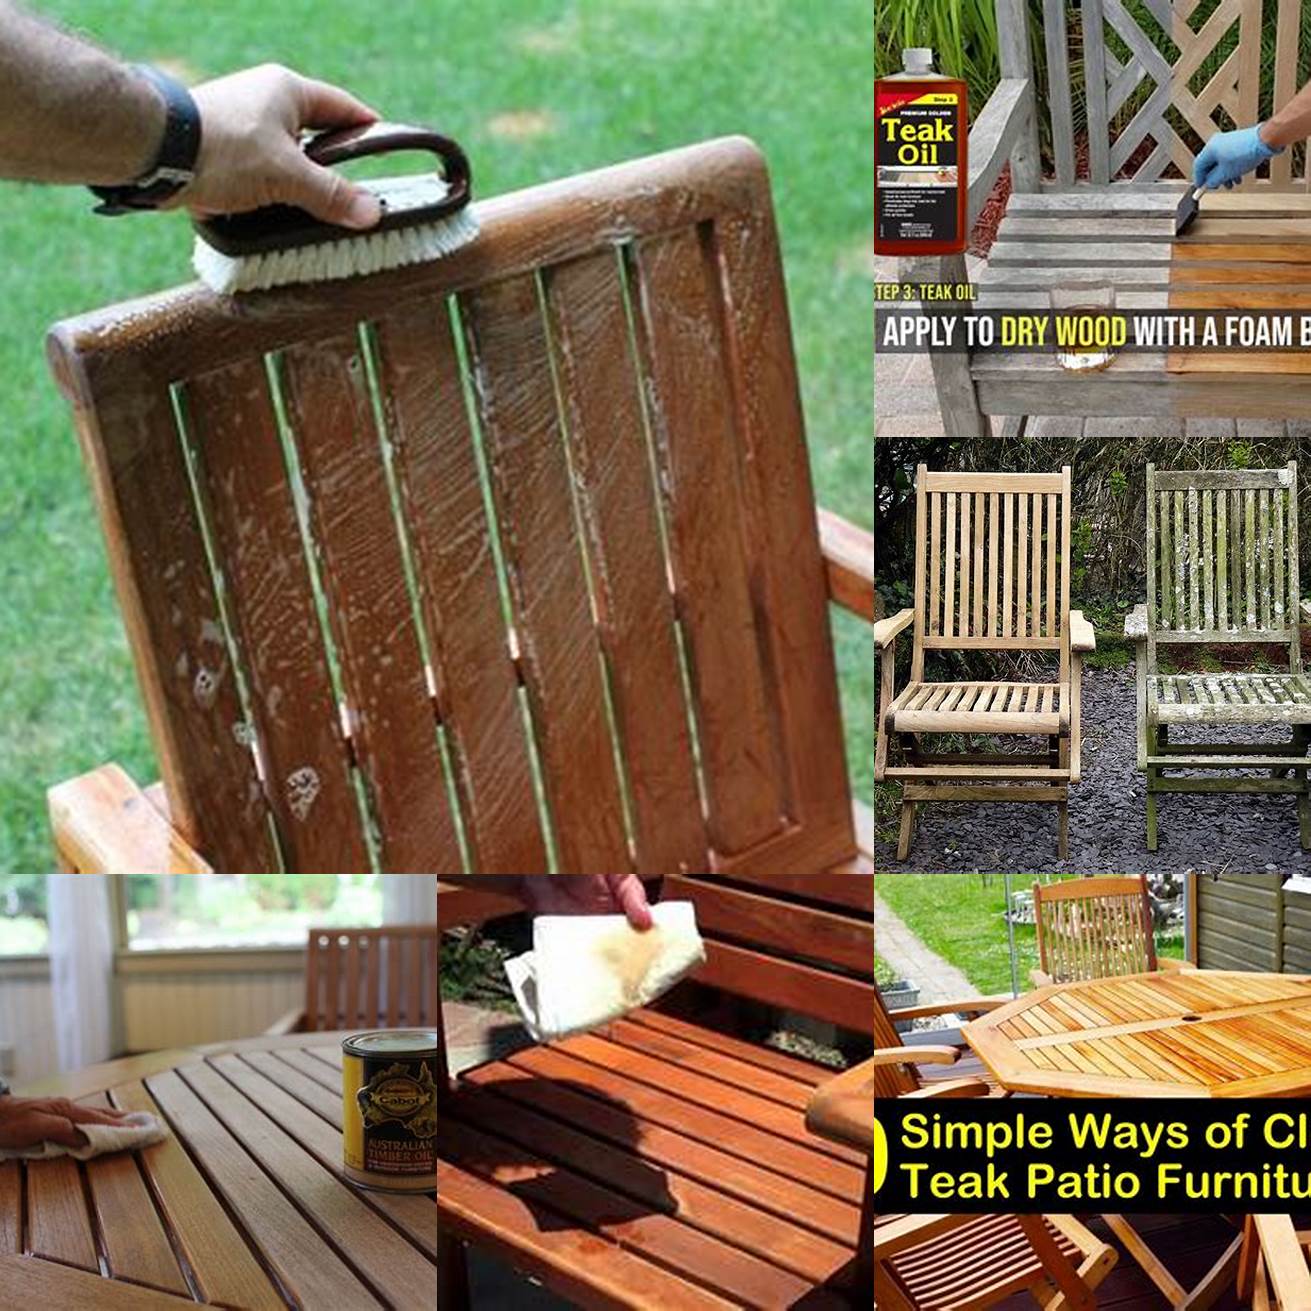 Tools for cleaning teak outdoor furniture